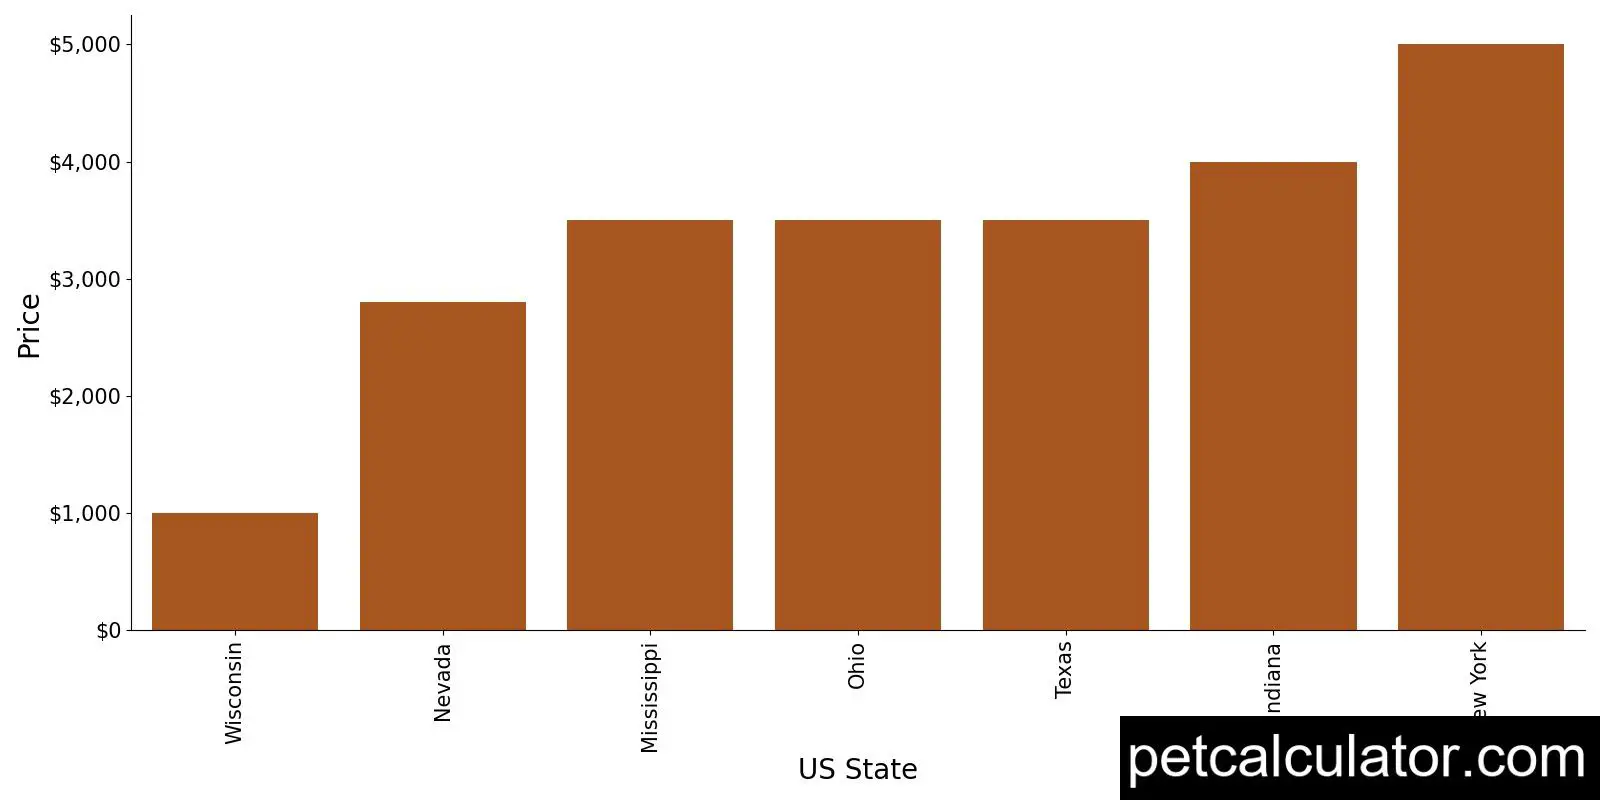 Price of French Spaniel by US State 